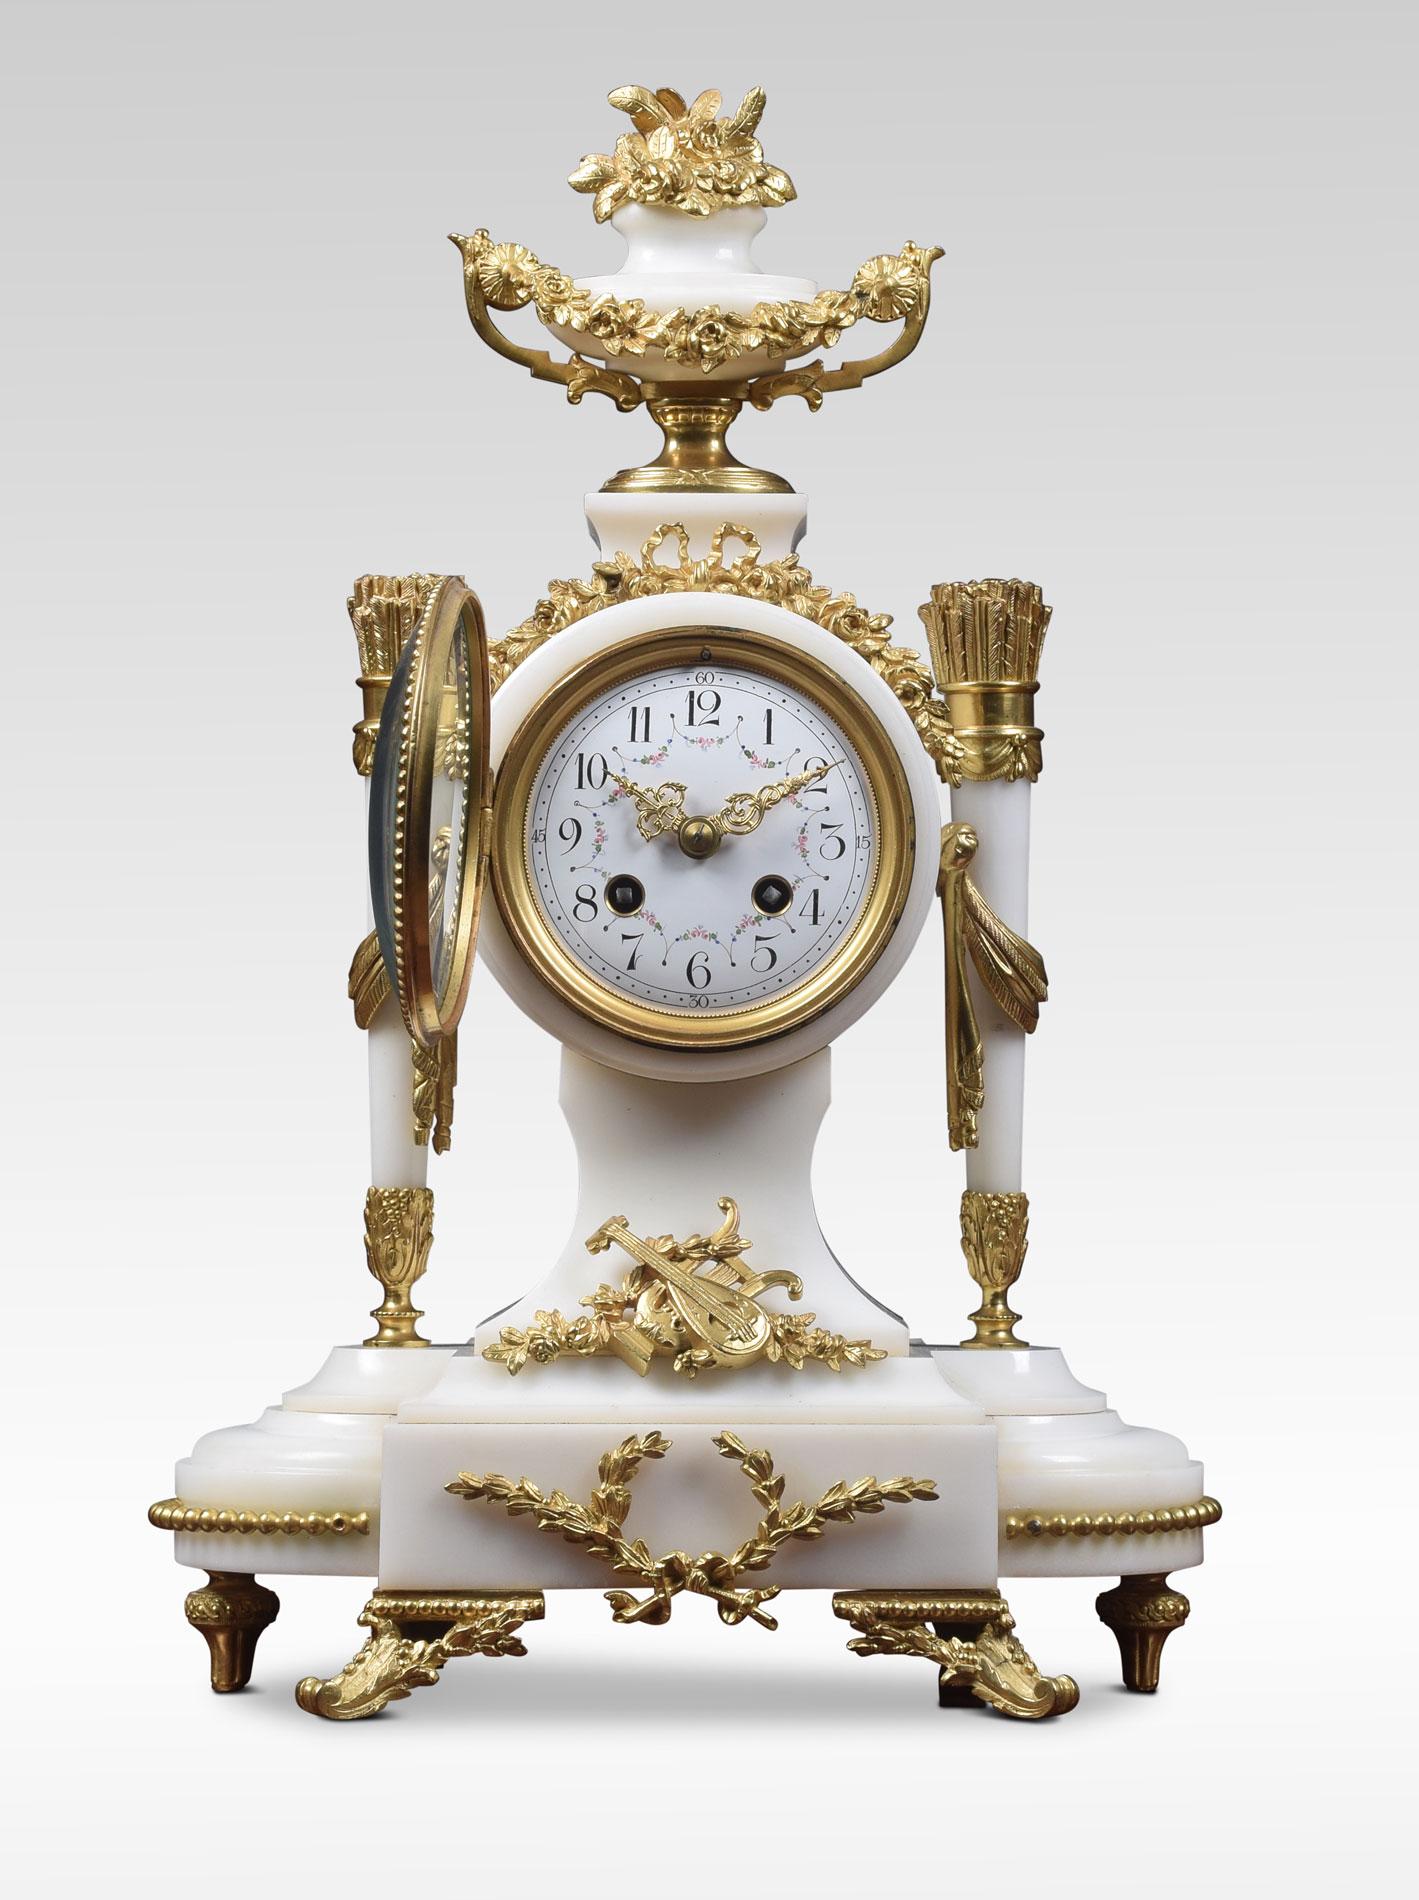 White marble and gilt metal mounted clock set. The clock surmounted with urn above a 4-inch white enamel dial with scrolling flowers and numerals. The two train movement striking a bell. Flanked by circular tapered columns raised up on a shaped